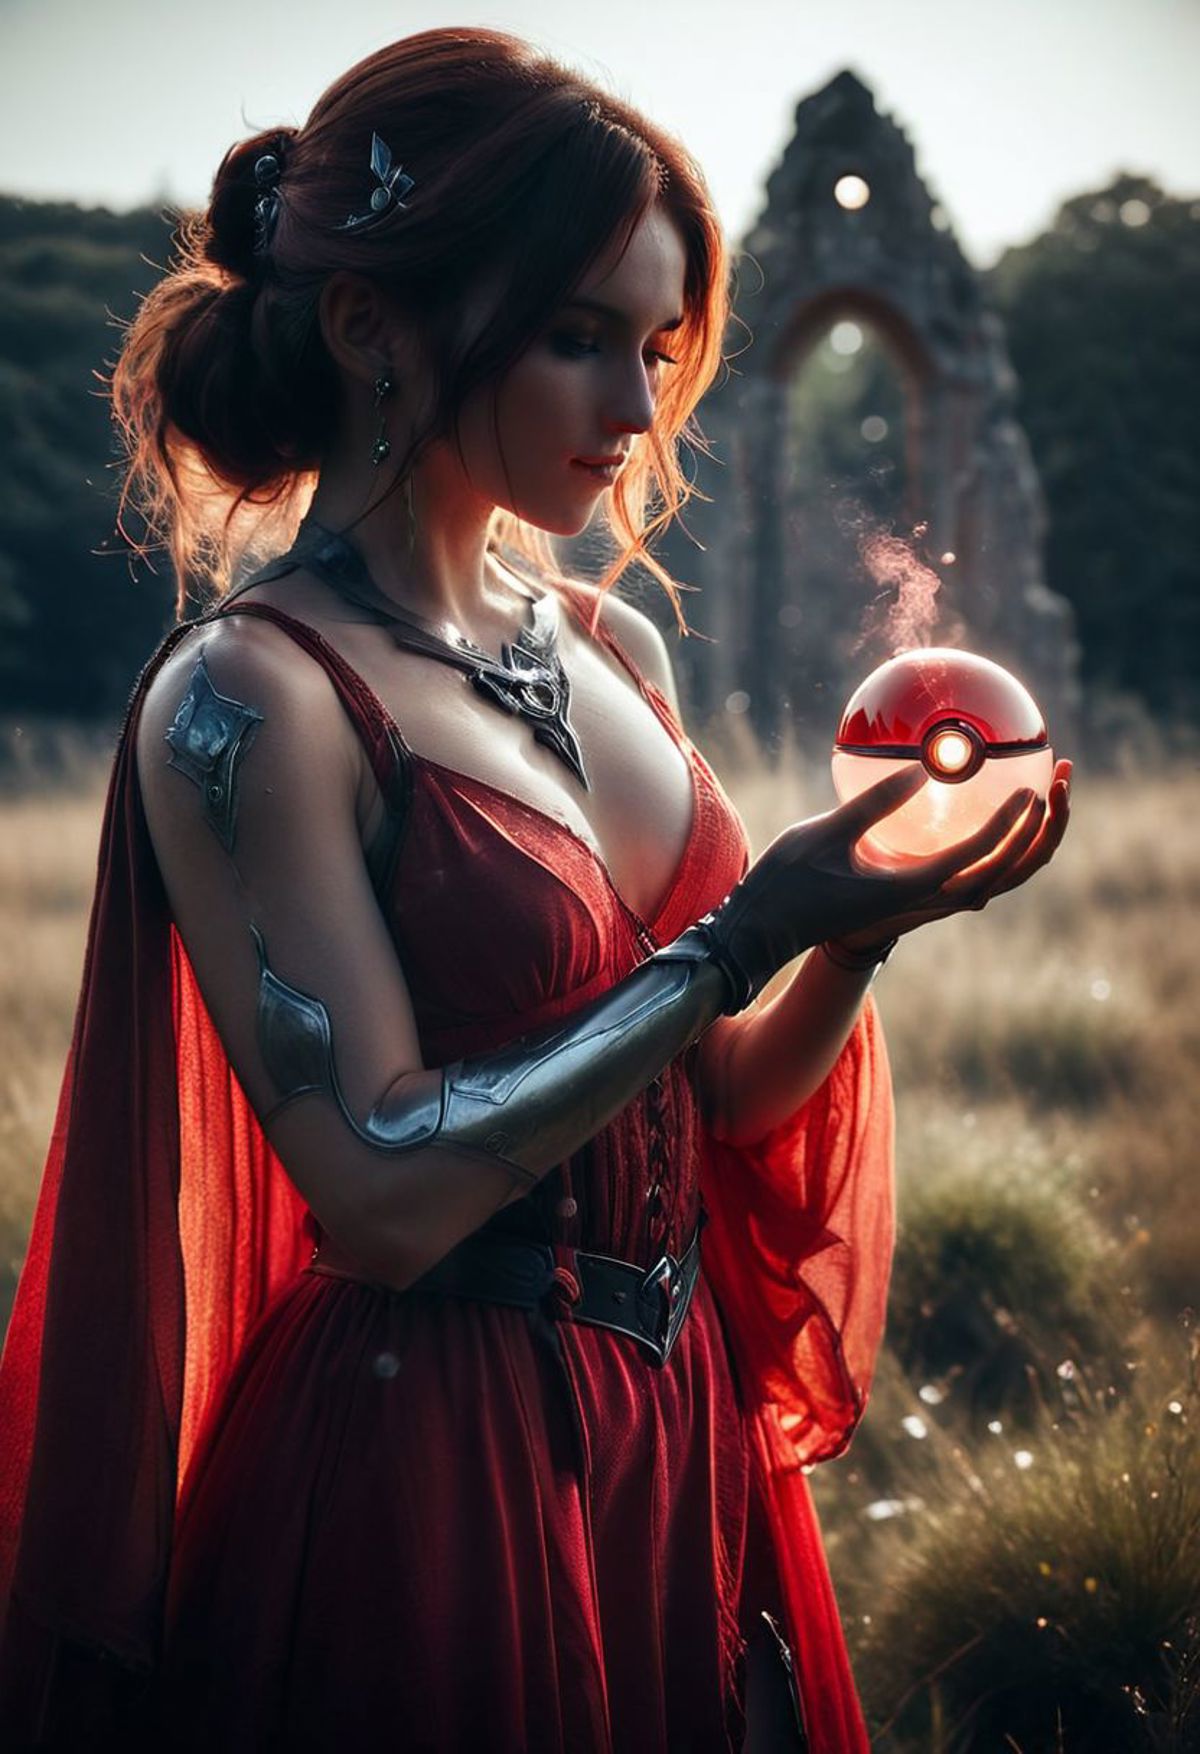 Smiling AtomicHeartTwinsCosplay, Captured by the glow of a translucent red/white Pokeball orbstaff, a brunette freckled bu...